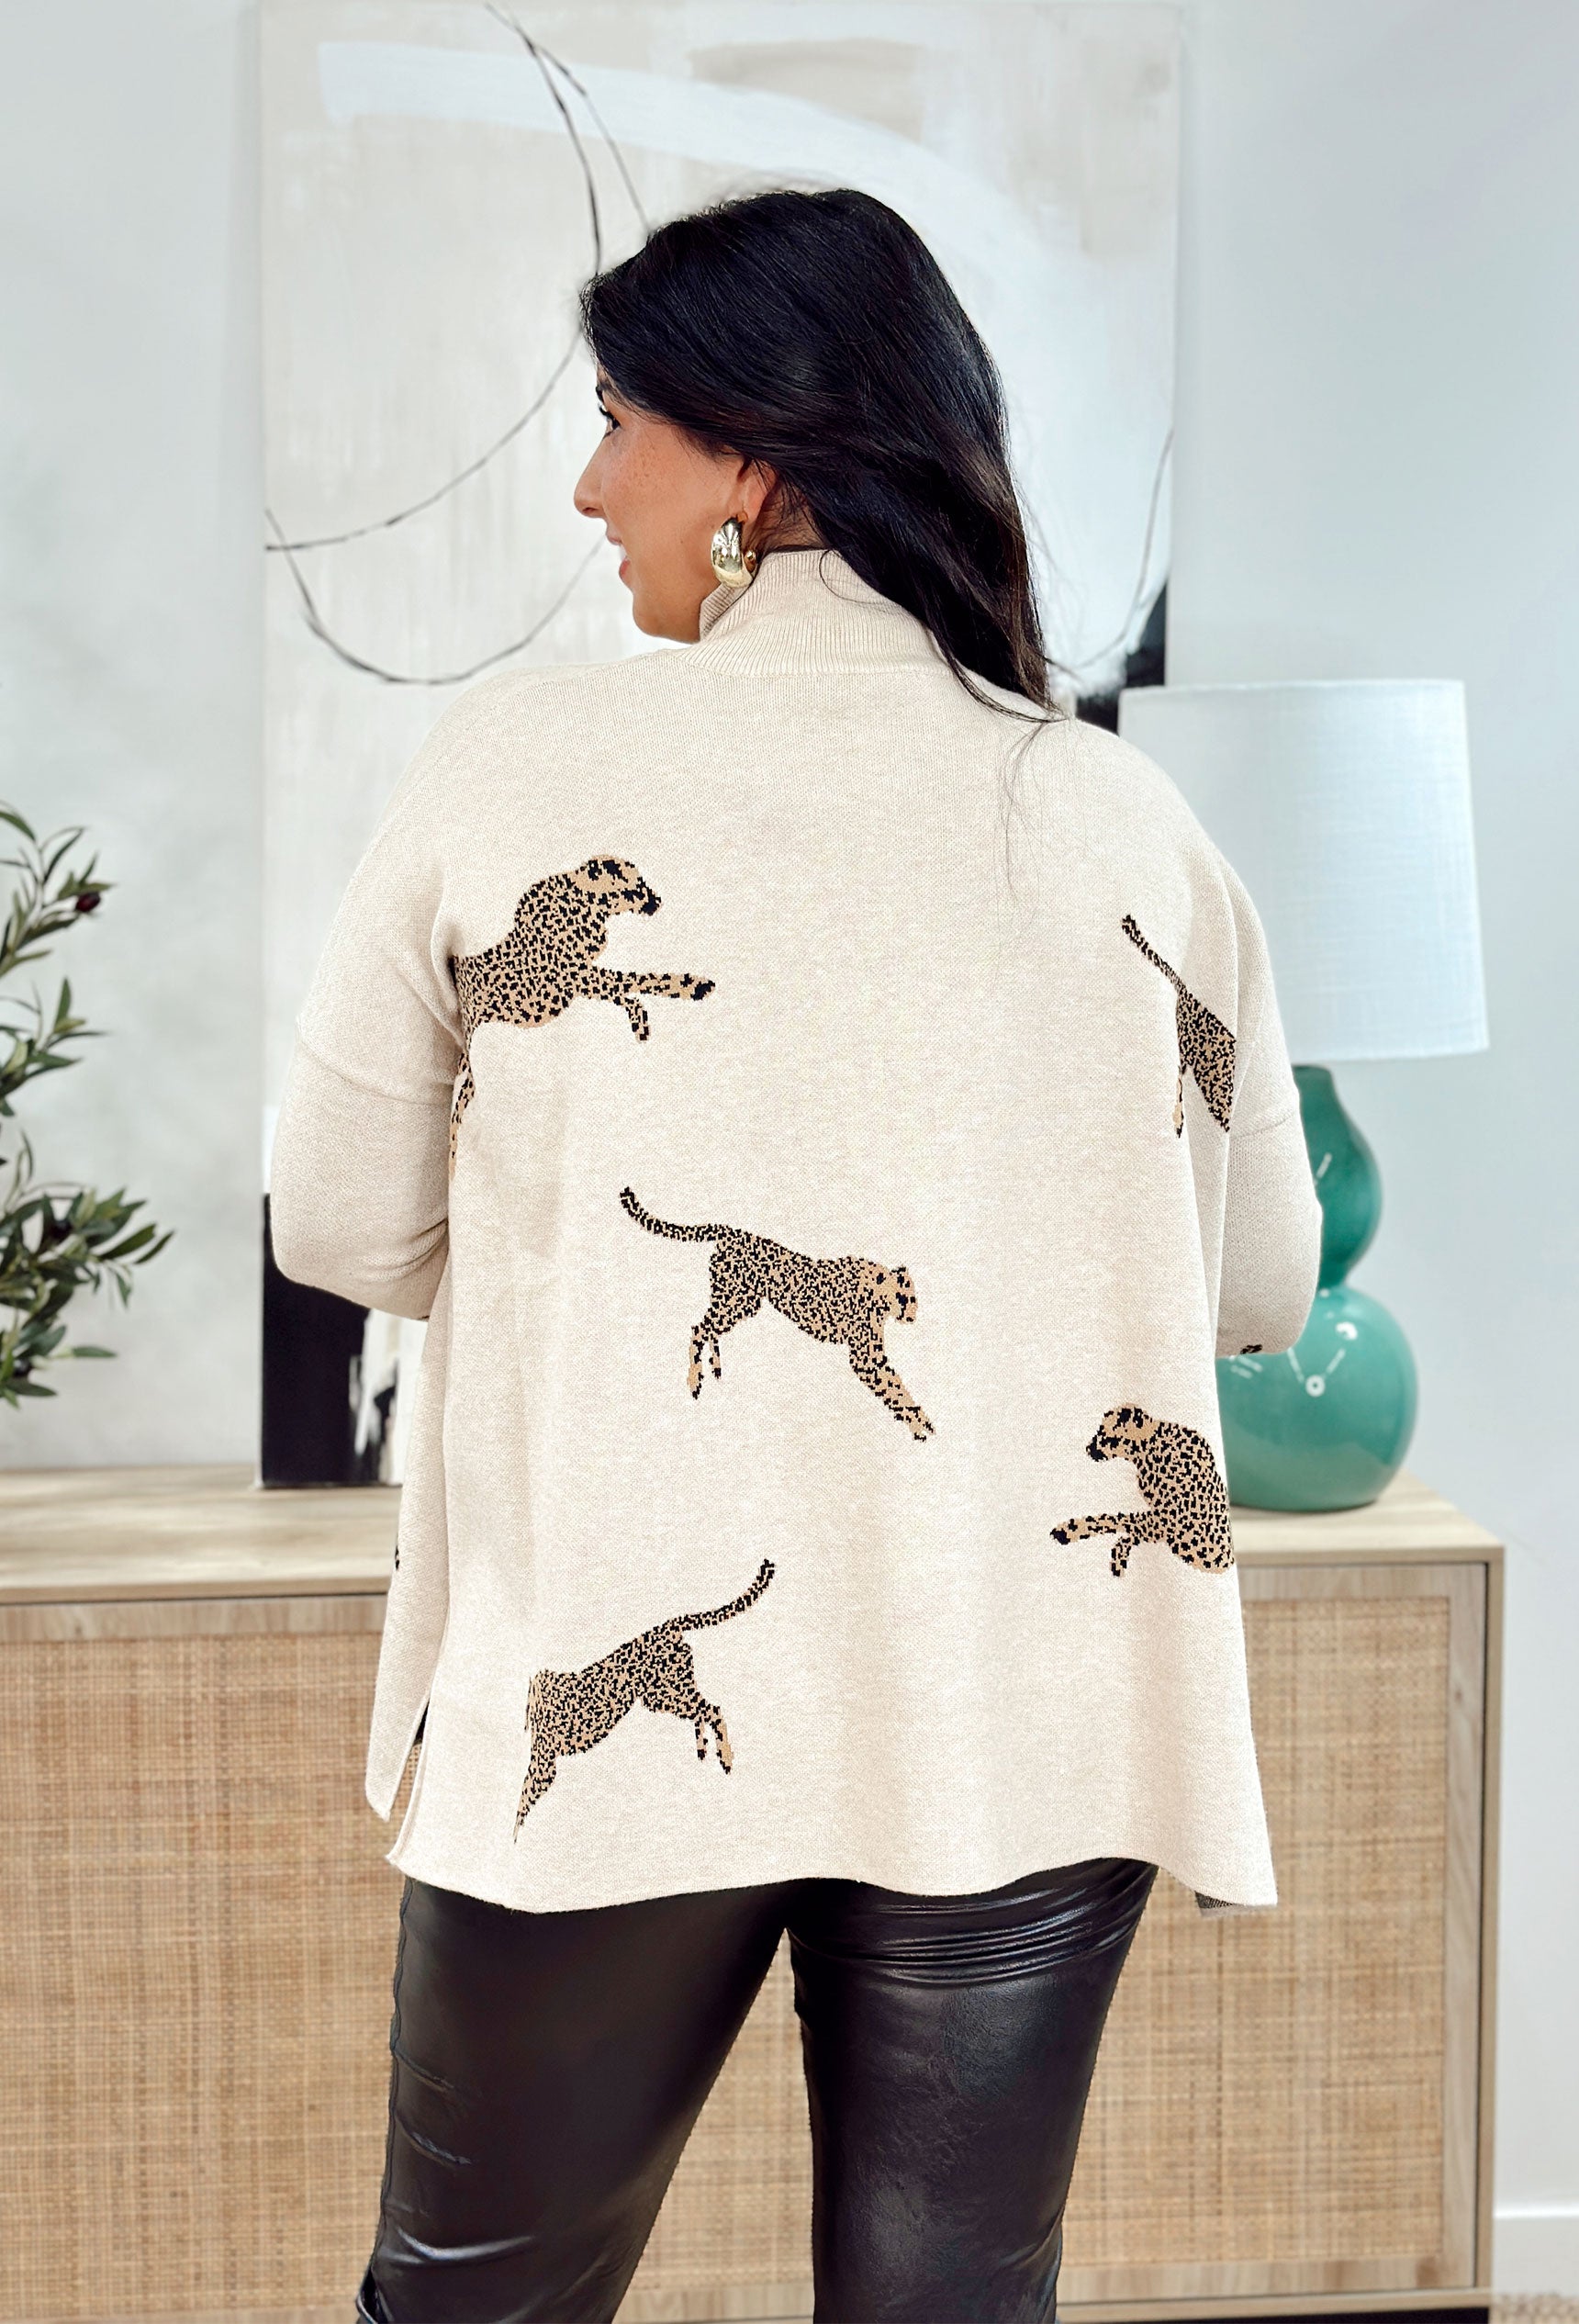 Wild Idea Sweater in Oatmeal, oatmeal sweater with leopards scattered on sweater, exaggerated slit on side